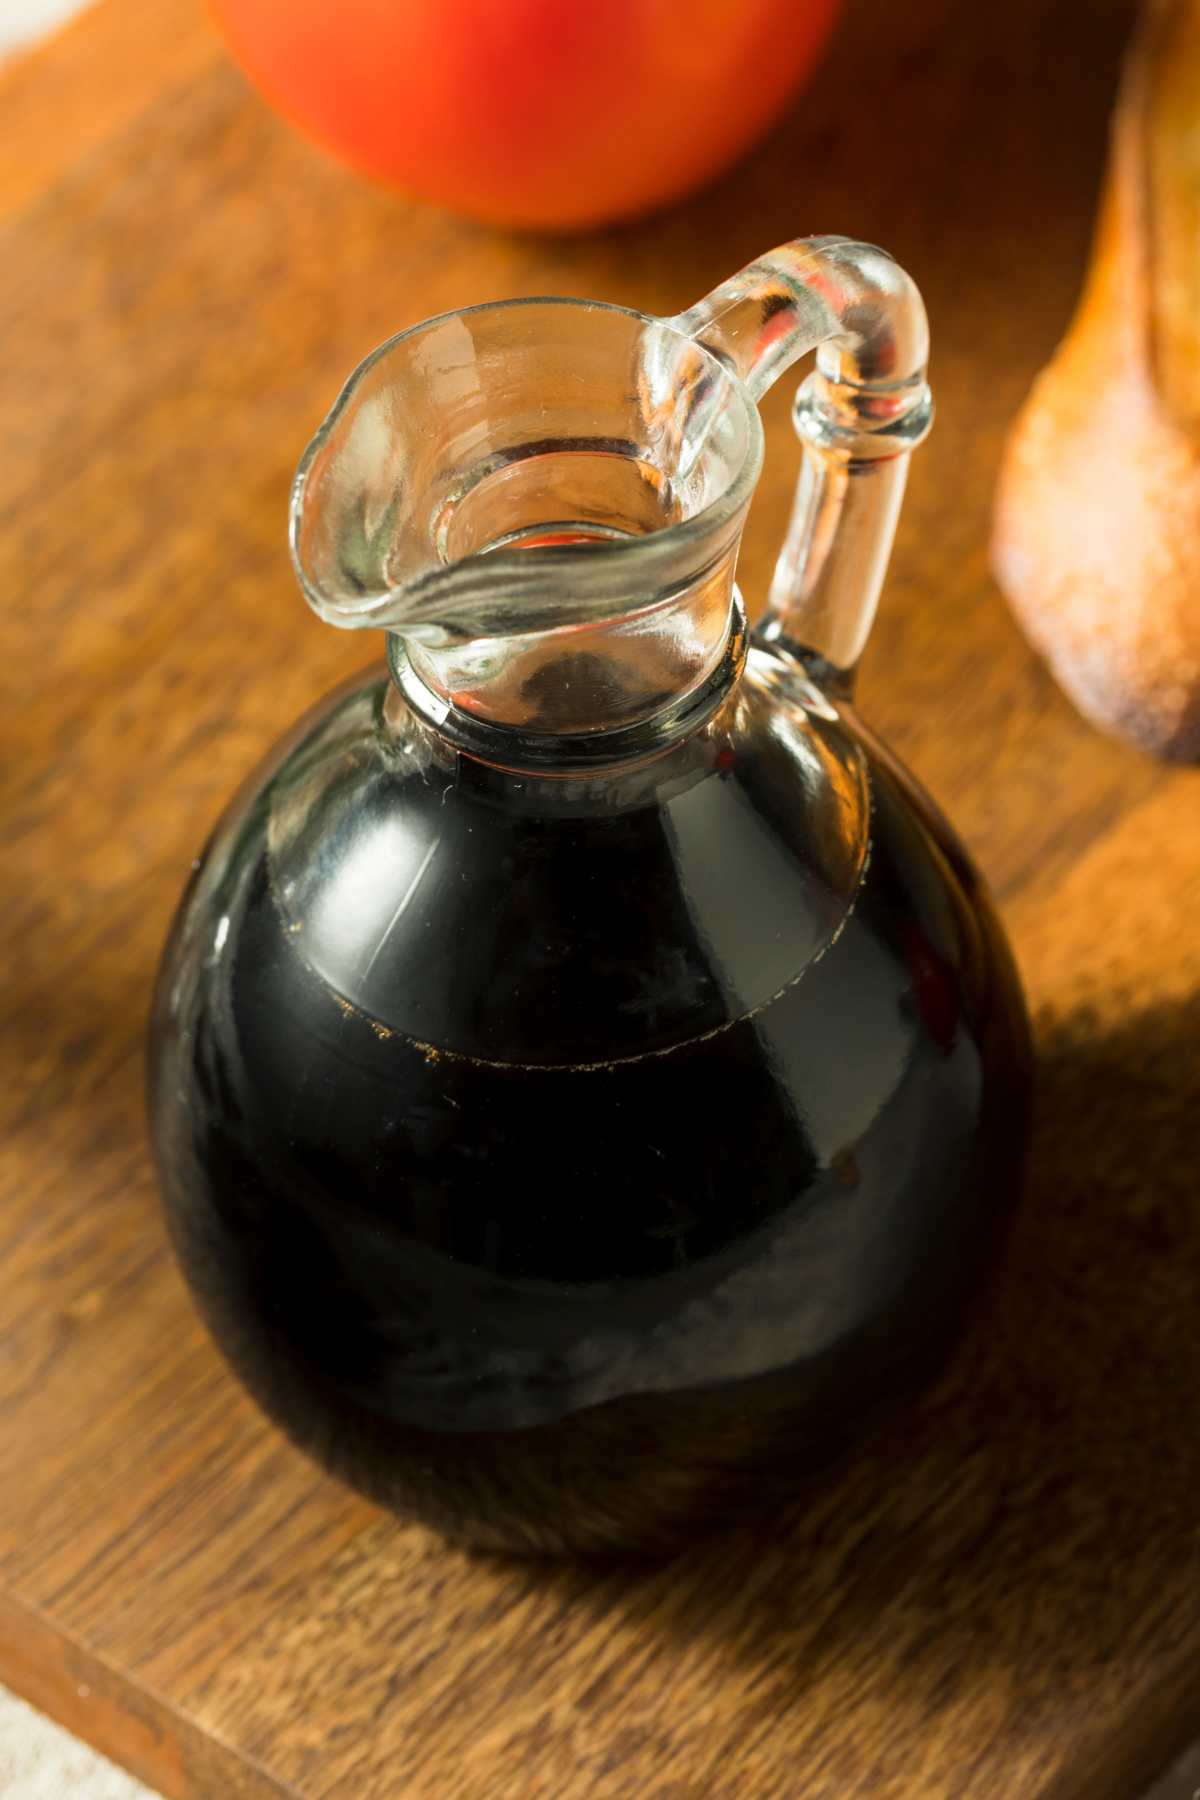 Is balsamic vinegar keto? How many carbs and net carbs are in balsamic vinegar? Many people following a ketogenic diet are wondering whether they can have certain condiments or dressings such as balsamic vinegar. In this post, we will discuss various aspects to help you determine whether you should include balsamic vinegar in your keto meals.